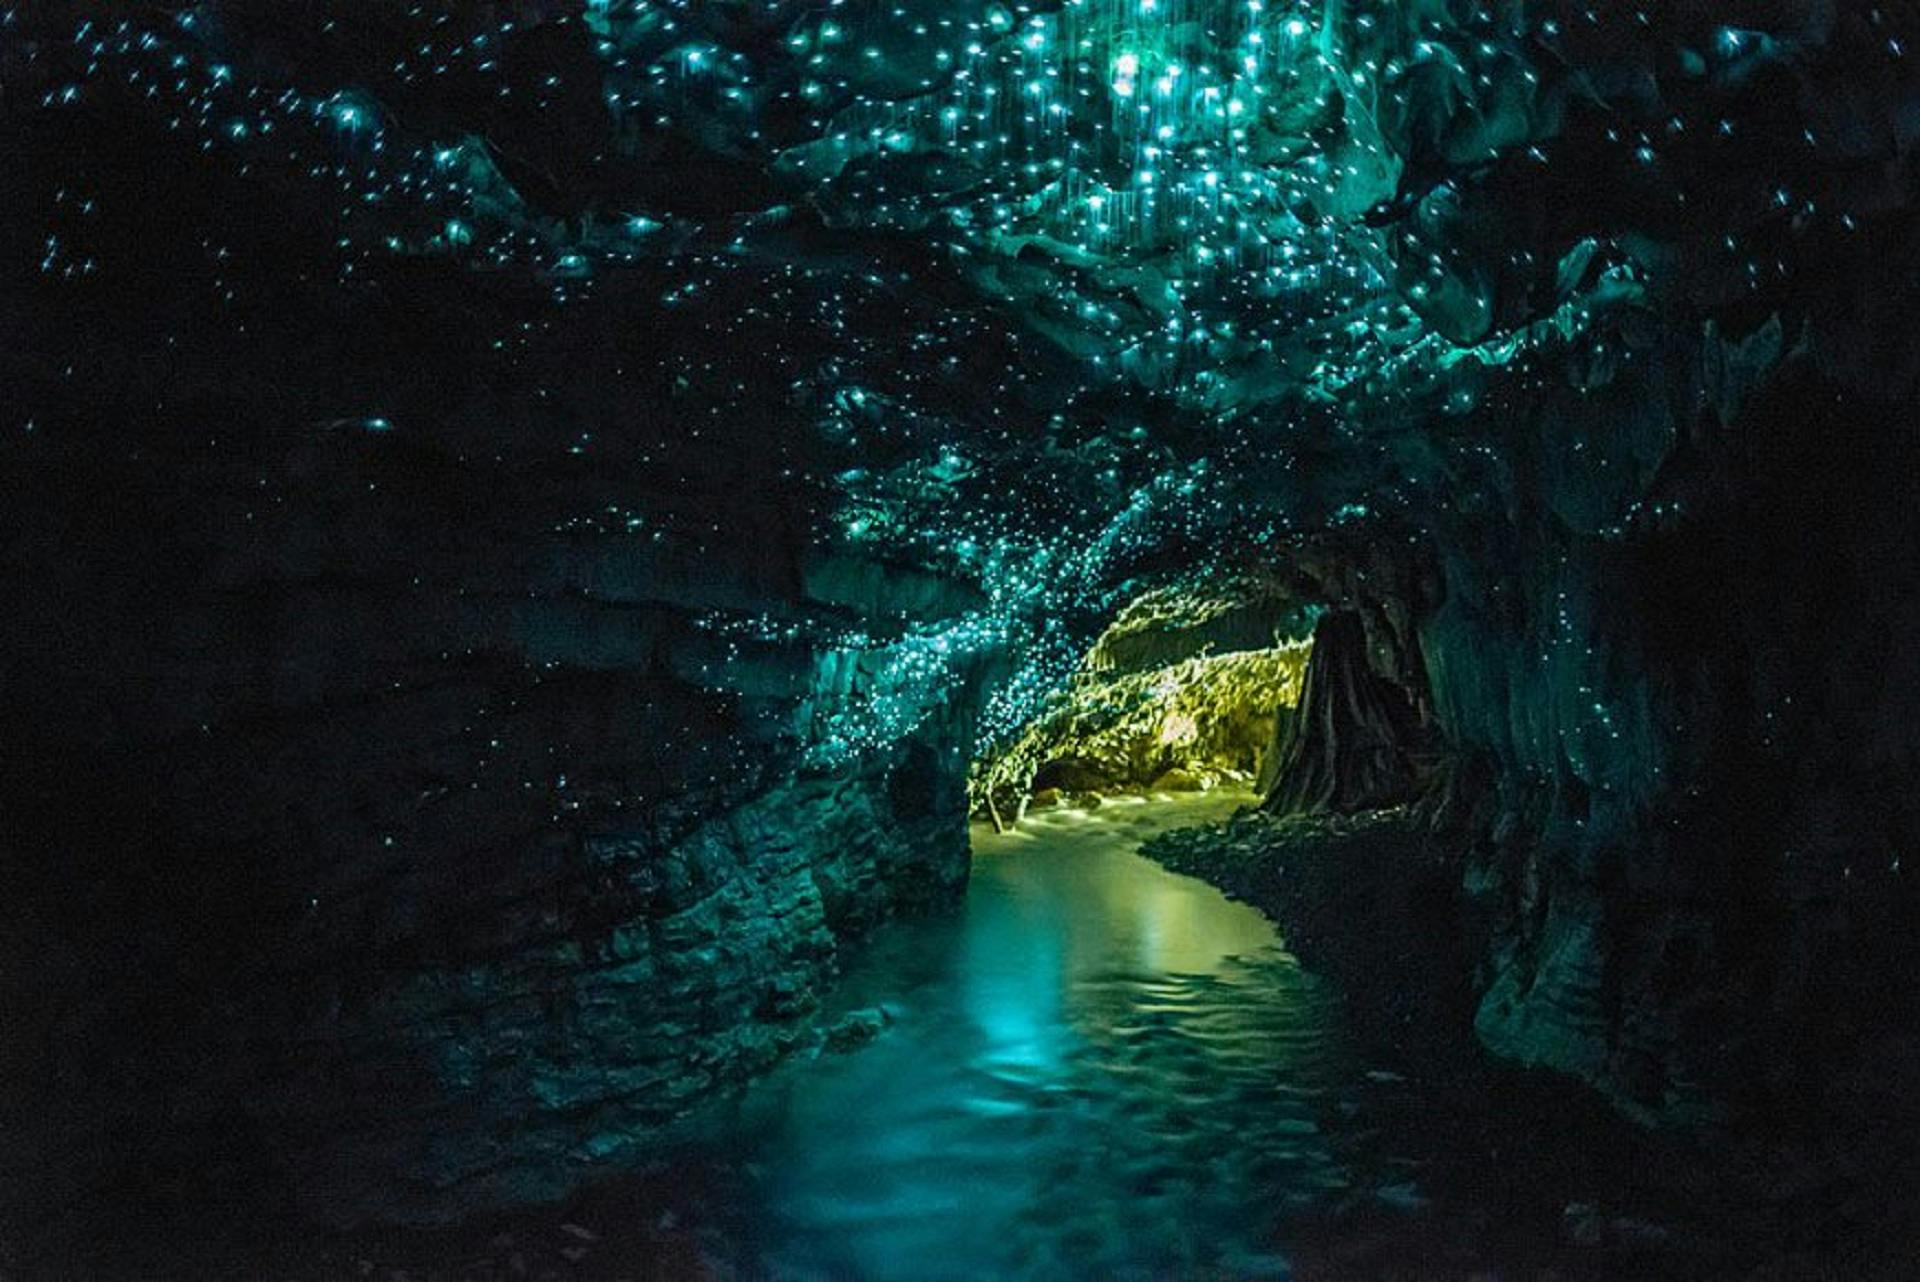 Waitomo Glowworm cave tour with boat ride Musement